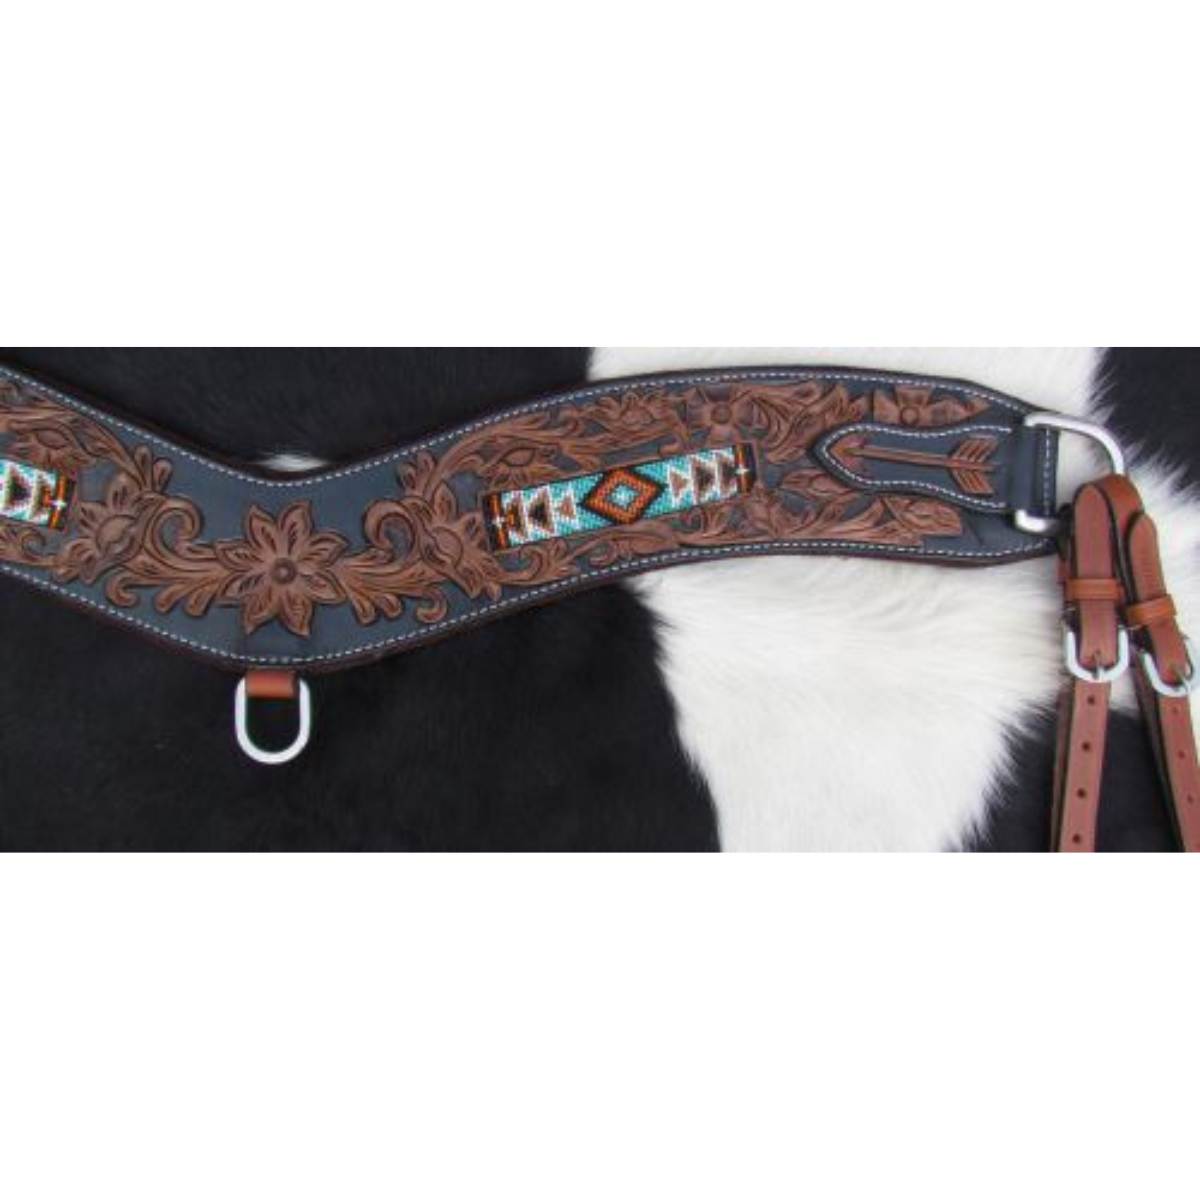 Showman ® Floral tooled tripping collar with beaded inlay. - Double T Saddles